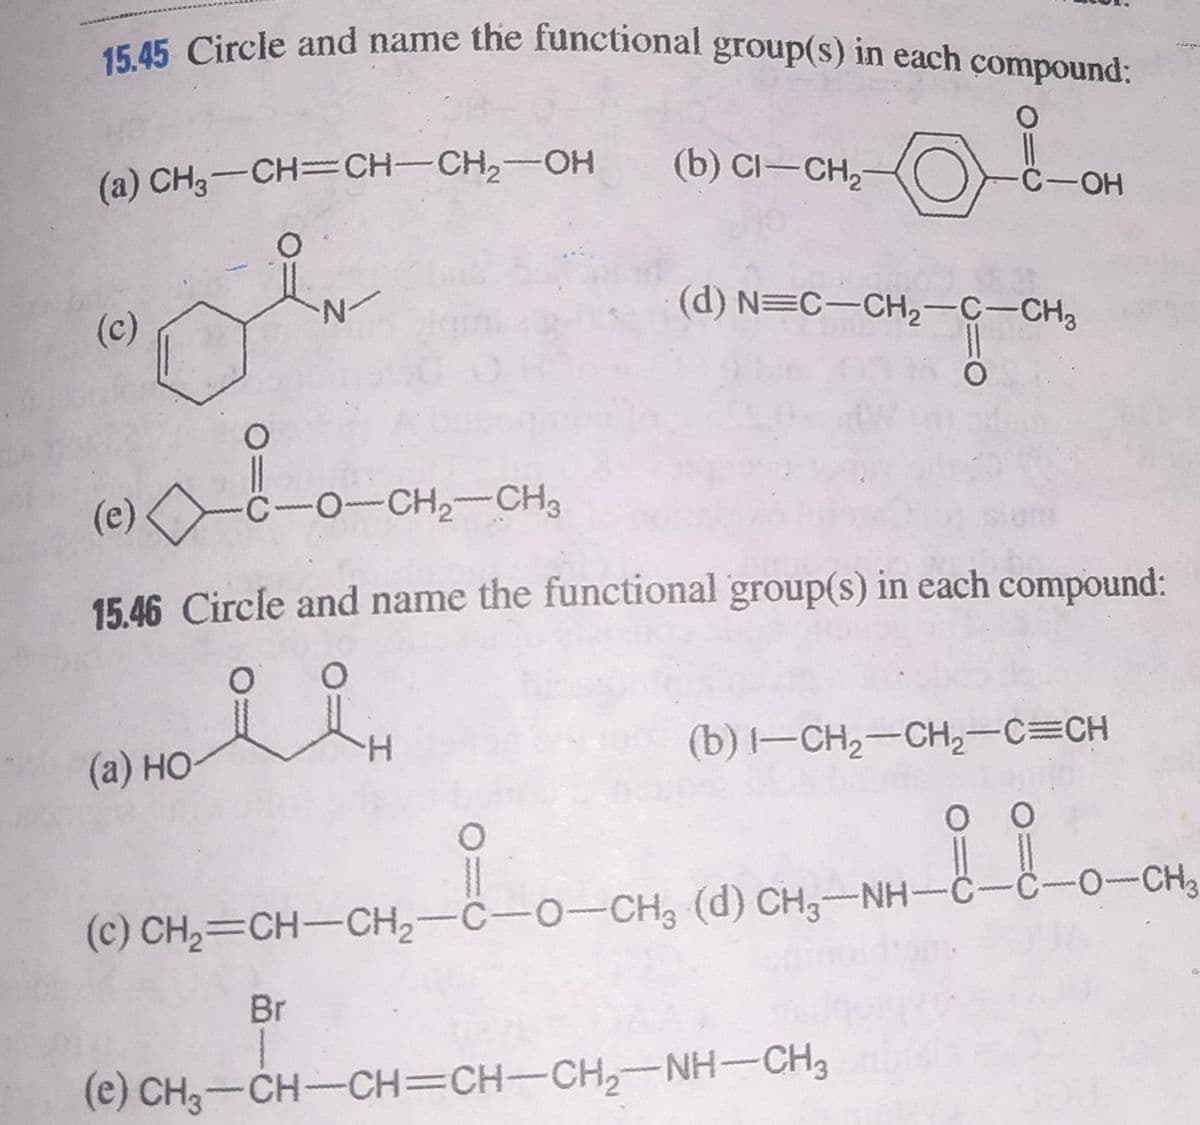 15.45 Circle and name the functional group(s) in each çompound:
(a) CH3-CH=CH-CH,-OH
(b) CI-CH,-
C-OH
(c)
N-
(d) N=C-CH2-C-CH3
(e)
C-O-CH,-CH3
www
15.46 Circle and name the functional group(s) in each compound:
(a) HO
H.
(b) -CH2-CH2-C=CH
0
www
(c) CH2=CH-CH,-C-O-CH3 (d) CH,-NH-C-C-o-CH3
Br
(e) CH3-CH-CH=CH-CH,-NH-CH3
